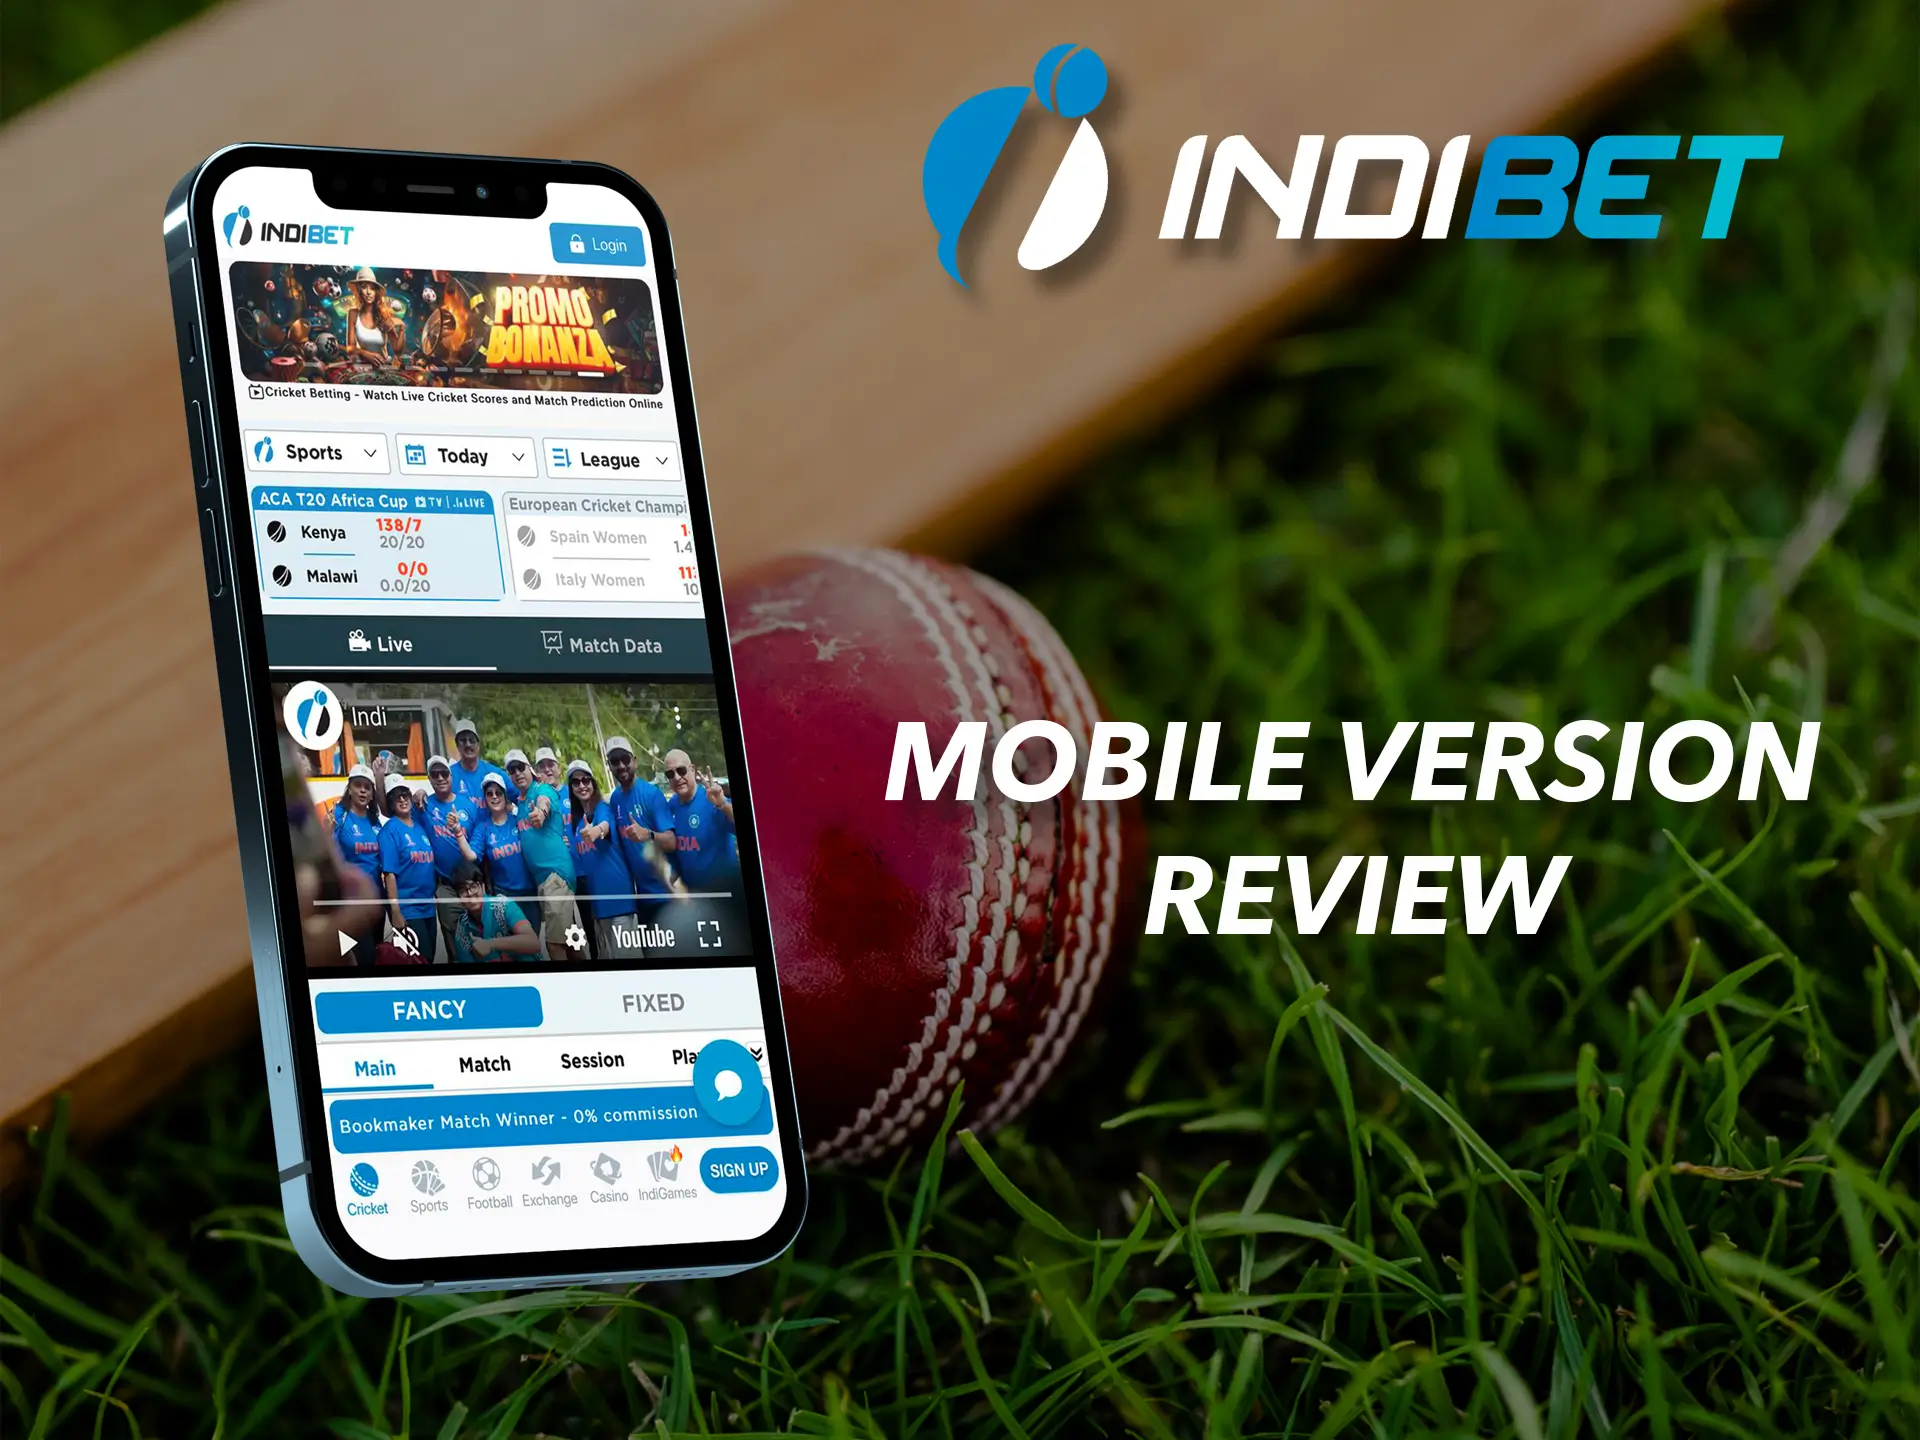 Use the mobile version of the Indibet website, which works perfectly on any device.